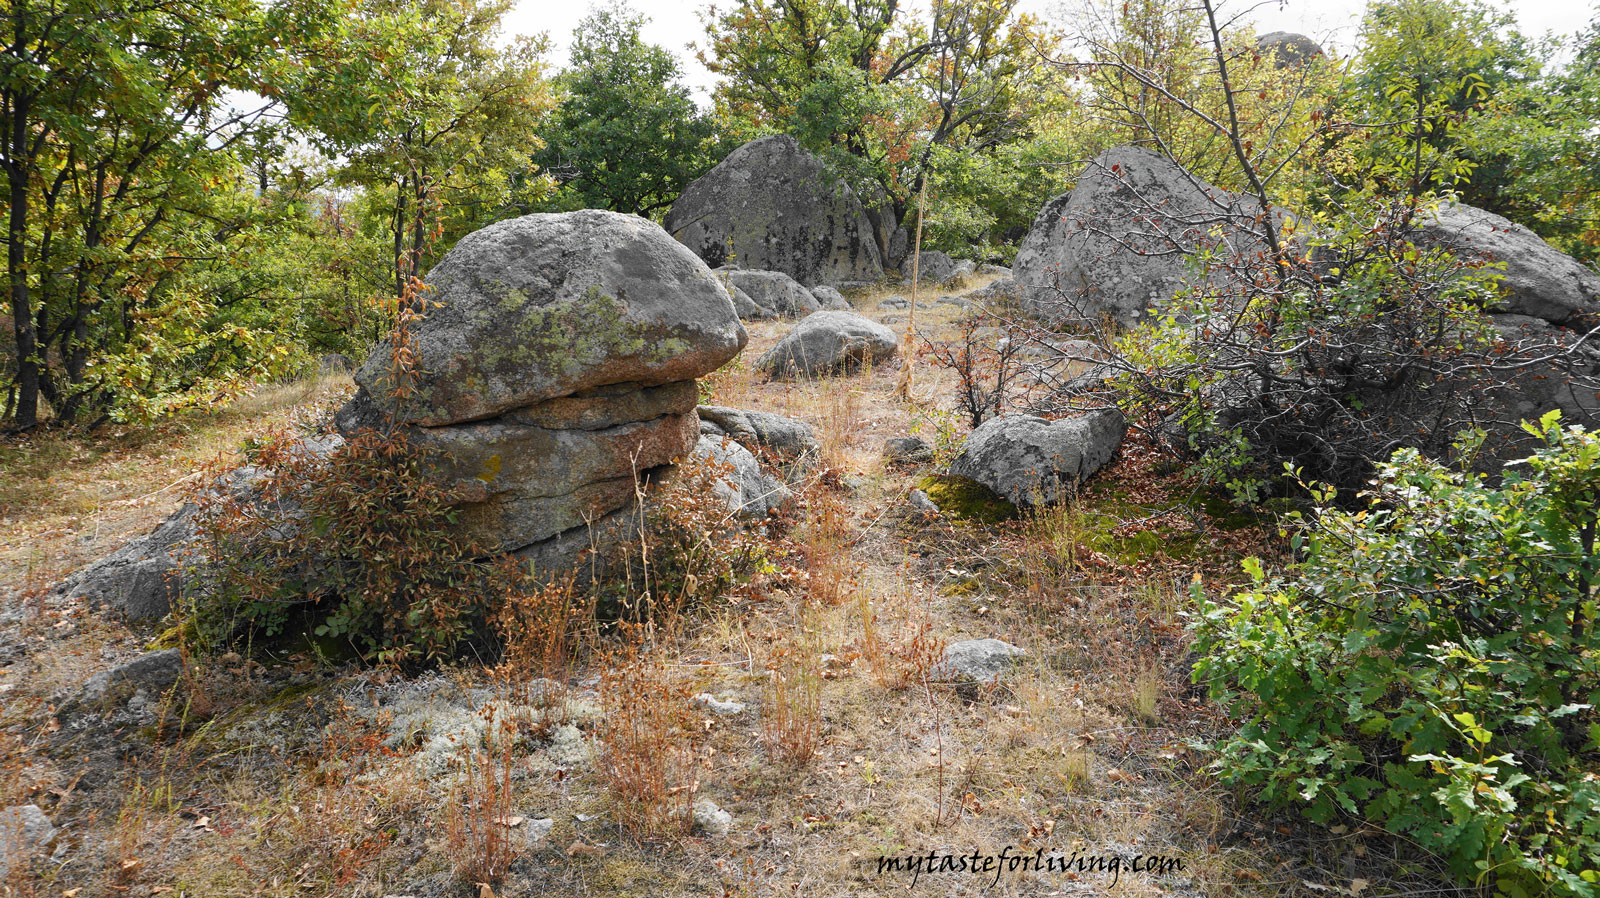 "Skumsale" locality is located 7 km from the town of Strelcha, towards the town of Koprivshtitsa, Bulgaria. It is characterized by a multitude of diverse rock formations used by ancient societies for rituals.